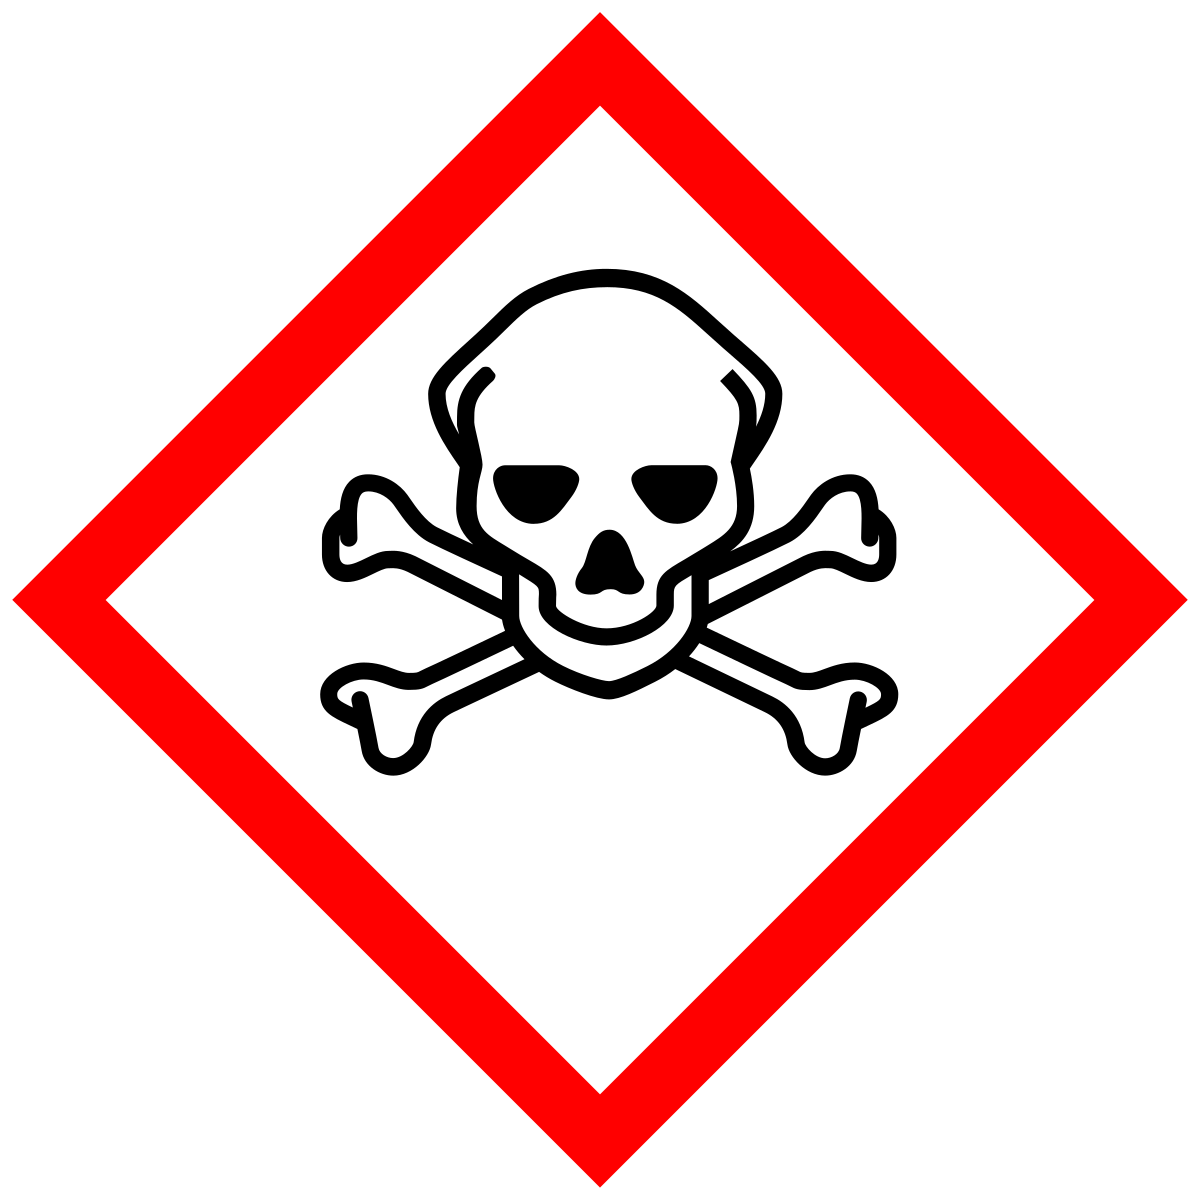 Red warning sign or caution symbol